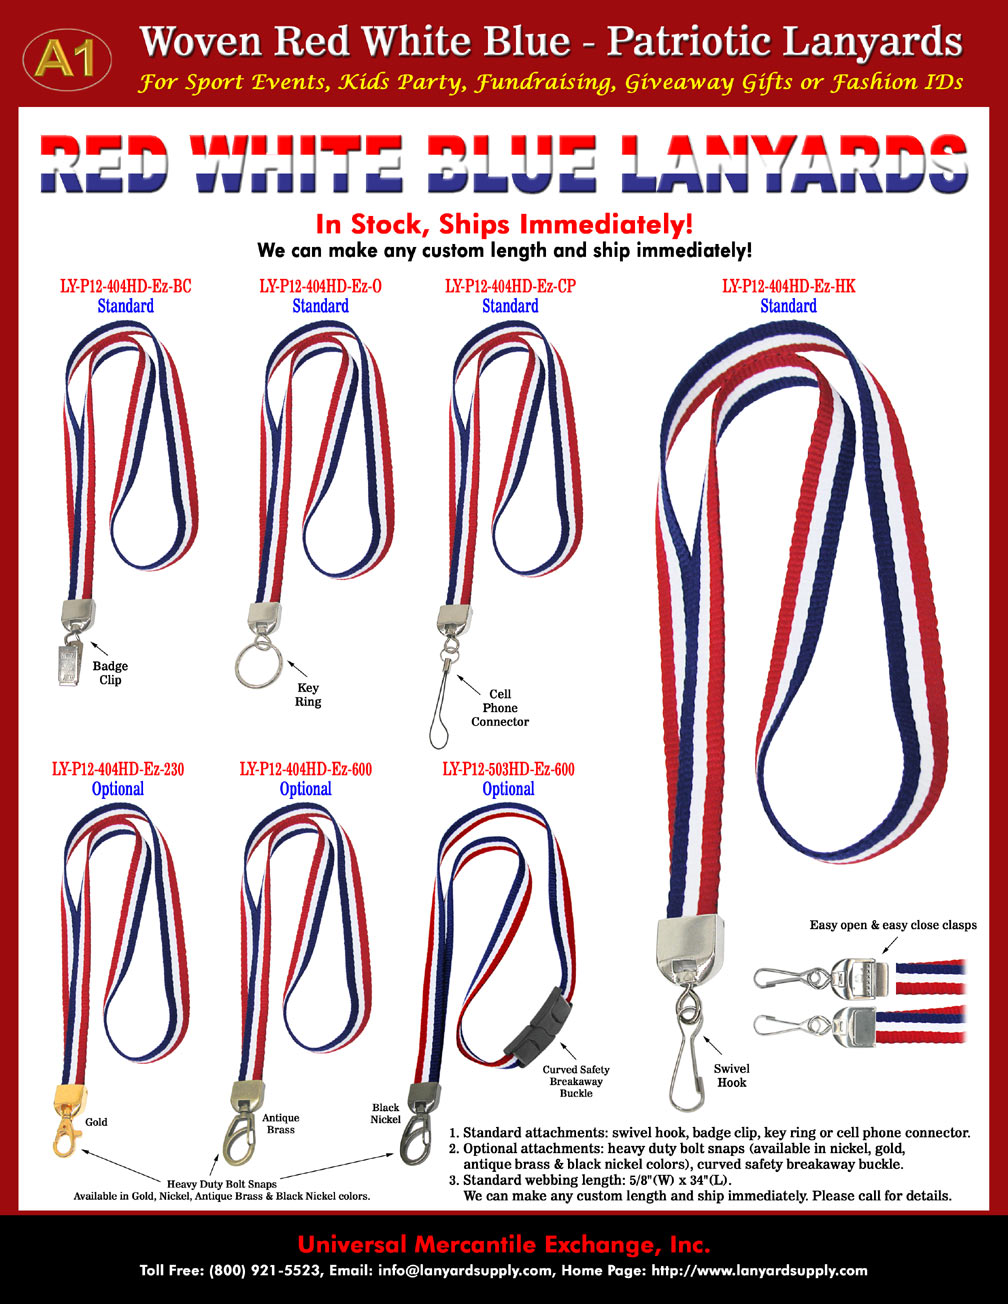 Lanyards With Woven Red-White-Blue Stripes For Cellular Phone Straps and Medal Award Neck Ribbon Lanyard Supplies